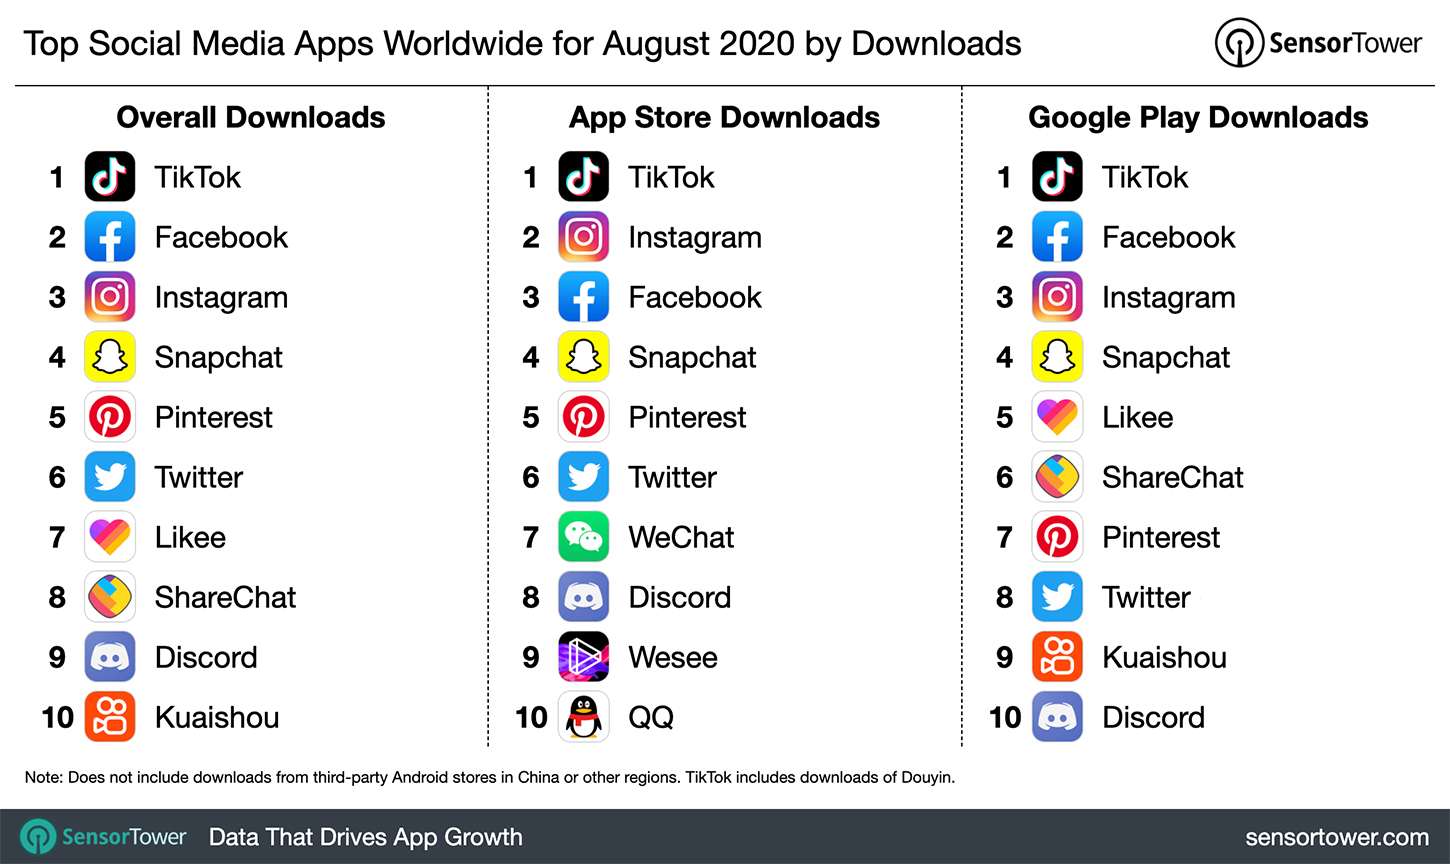 Top Social Media Apps Worldwide for August 2020 by Downloads